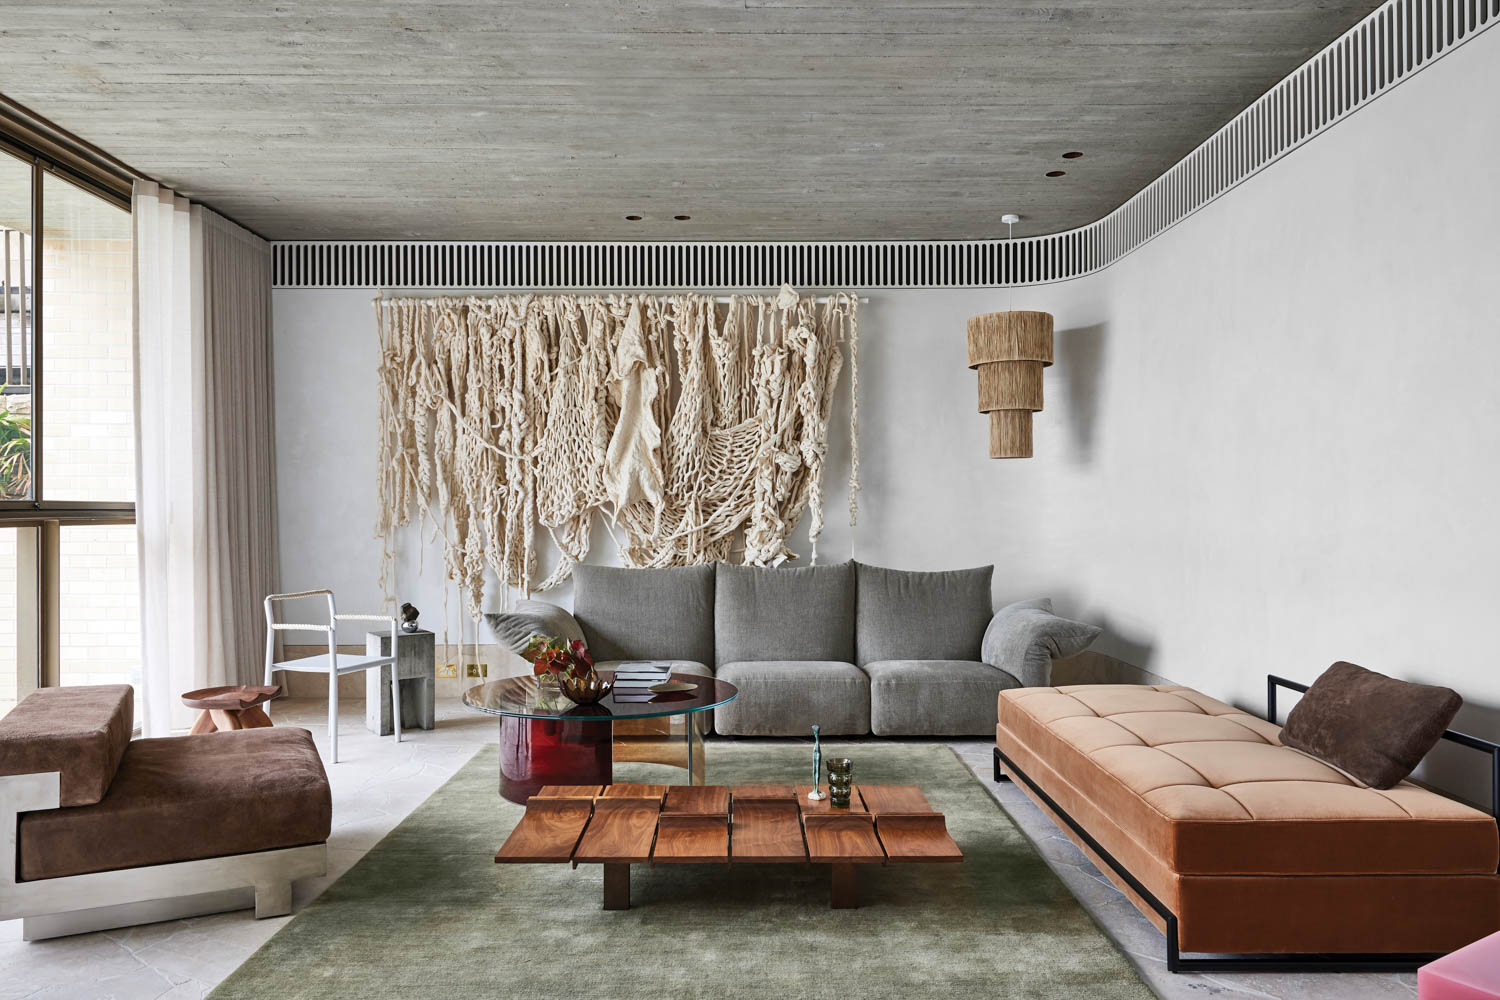 the cabana sitting area of this Sydney home, filled with artwork and several seating options